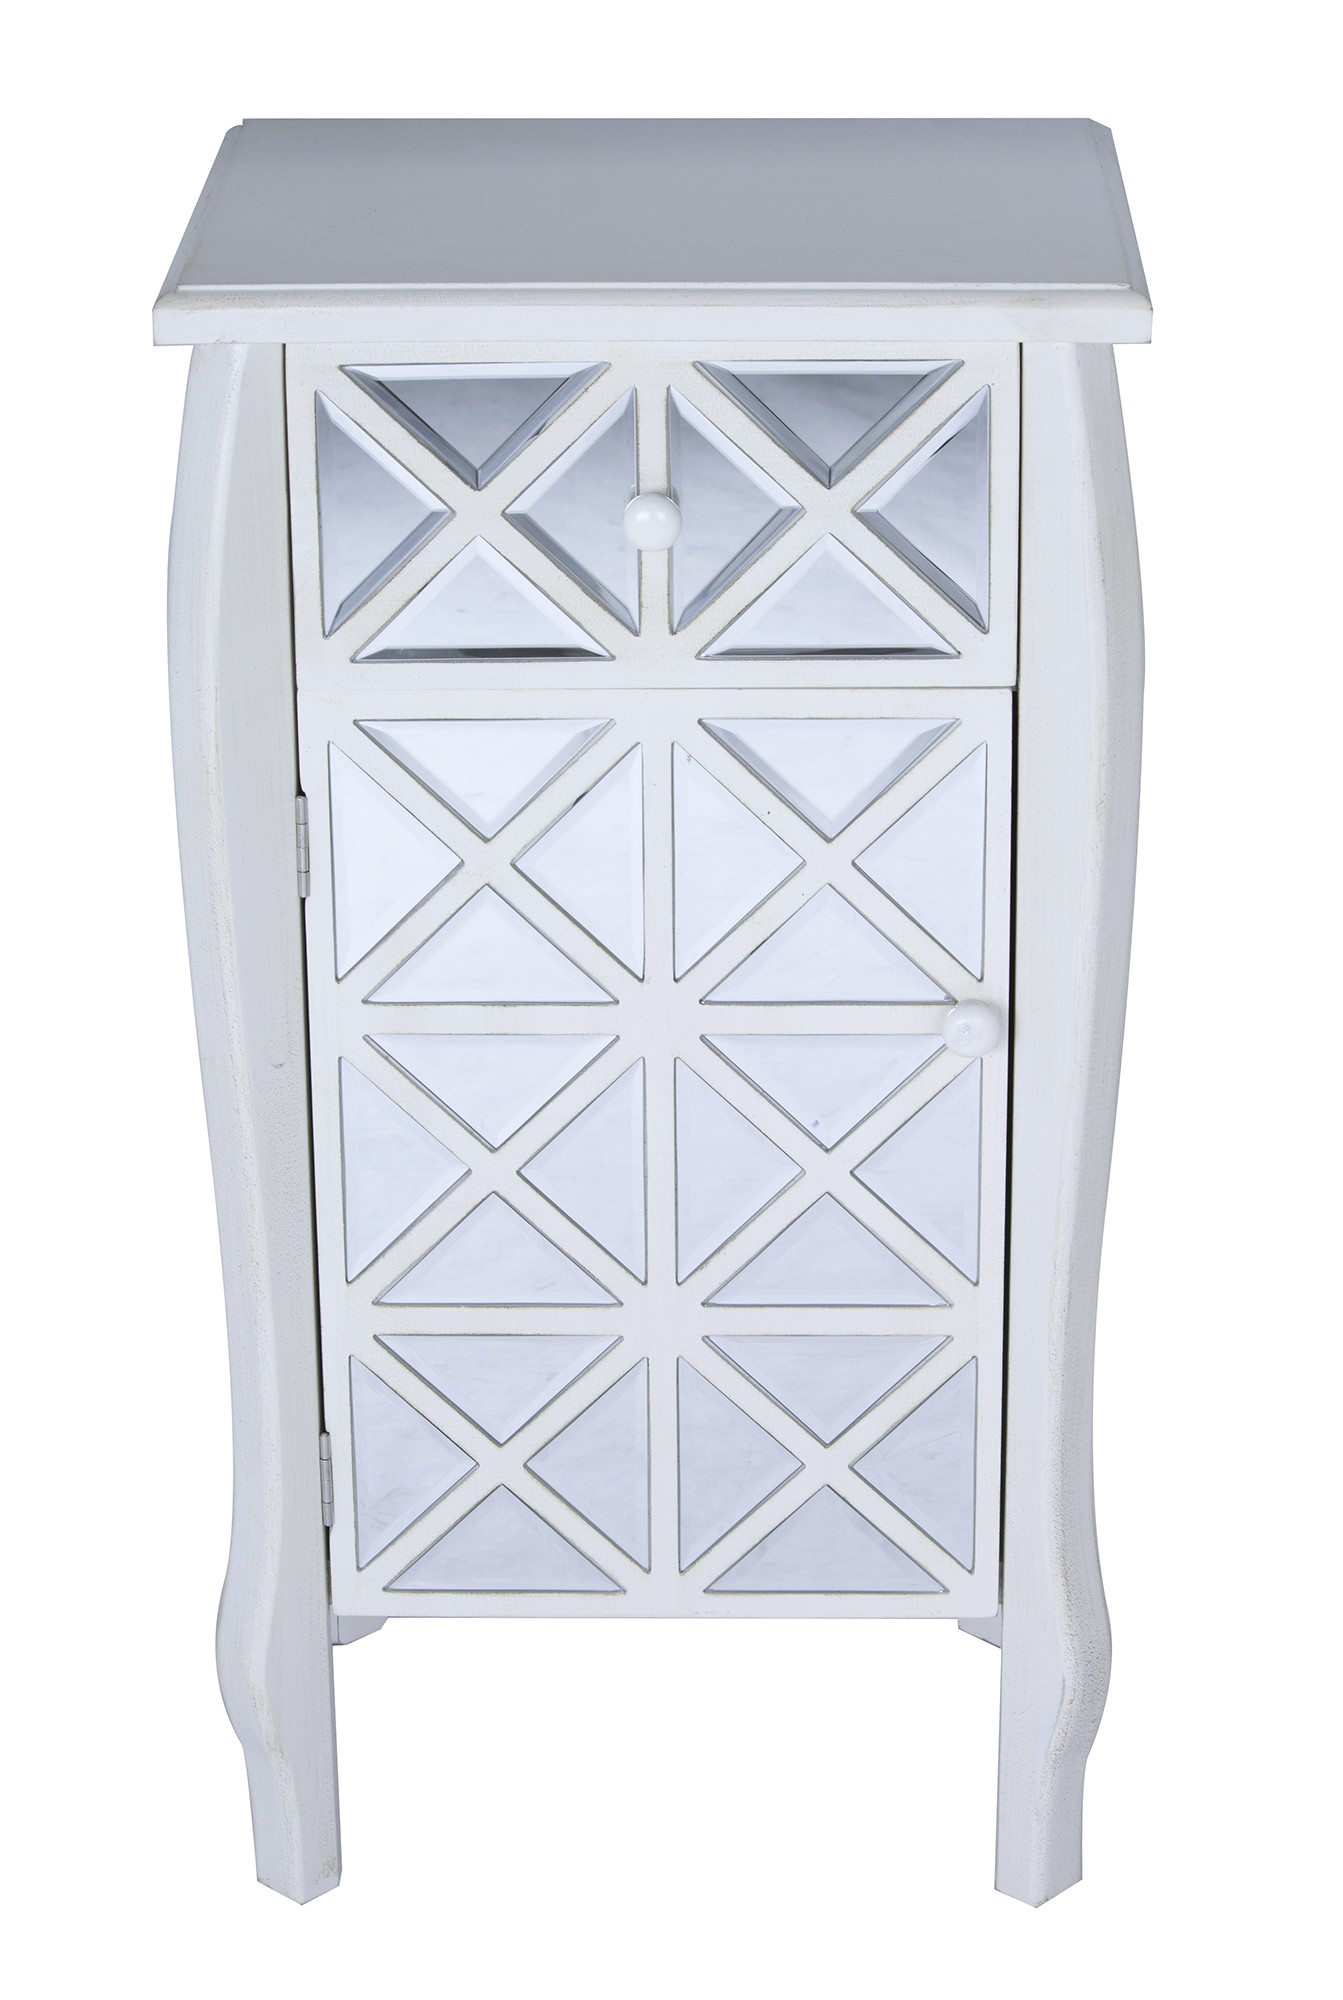 24.75" X 19" X 39.75" Antique White MDF Wood Mirrored Glass Accent Cabinet with Mirrored Drawer and Door